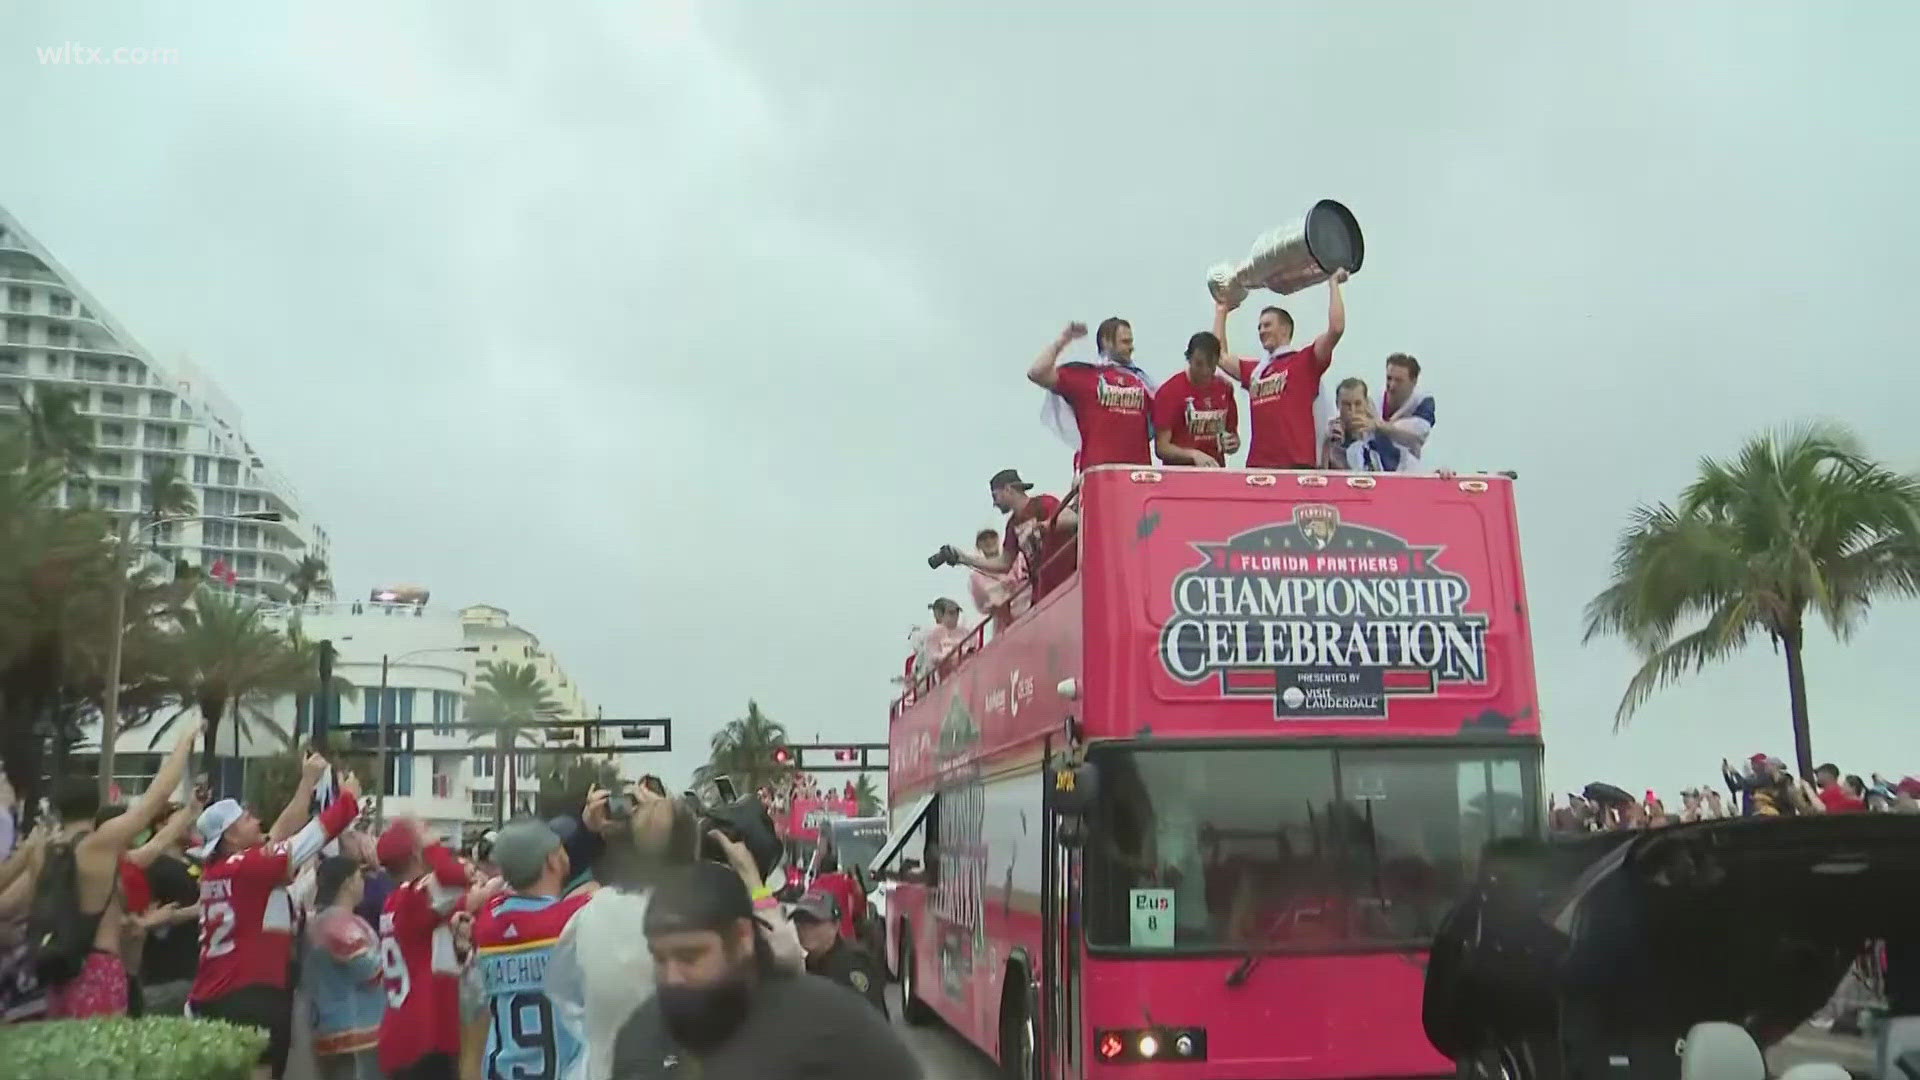 The Florida Panthers held their first victory parade nearly a week after winning that franchise's first Stanley Cup after a 2-1 victory over Edmonton in game 7.